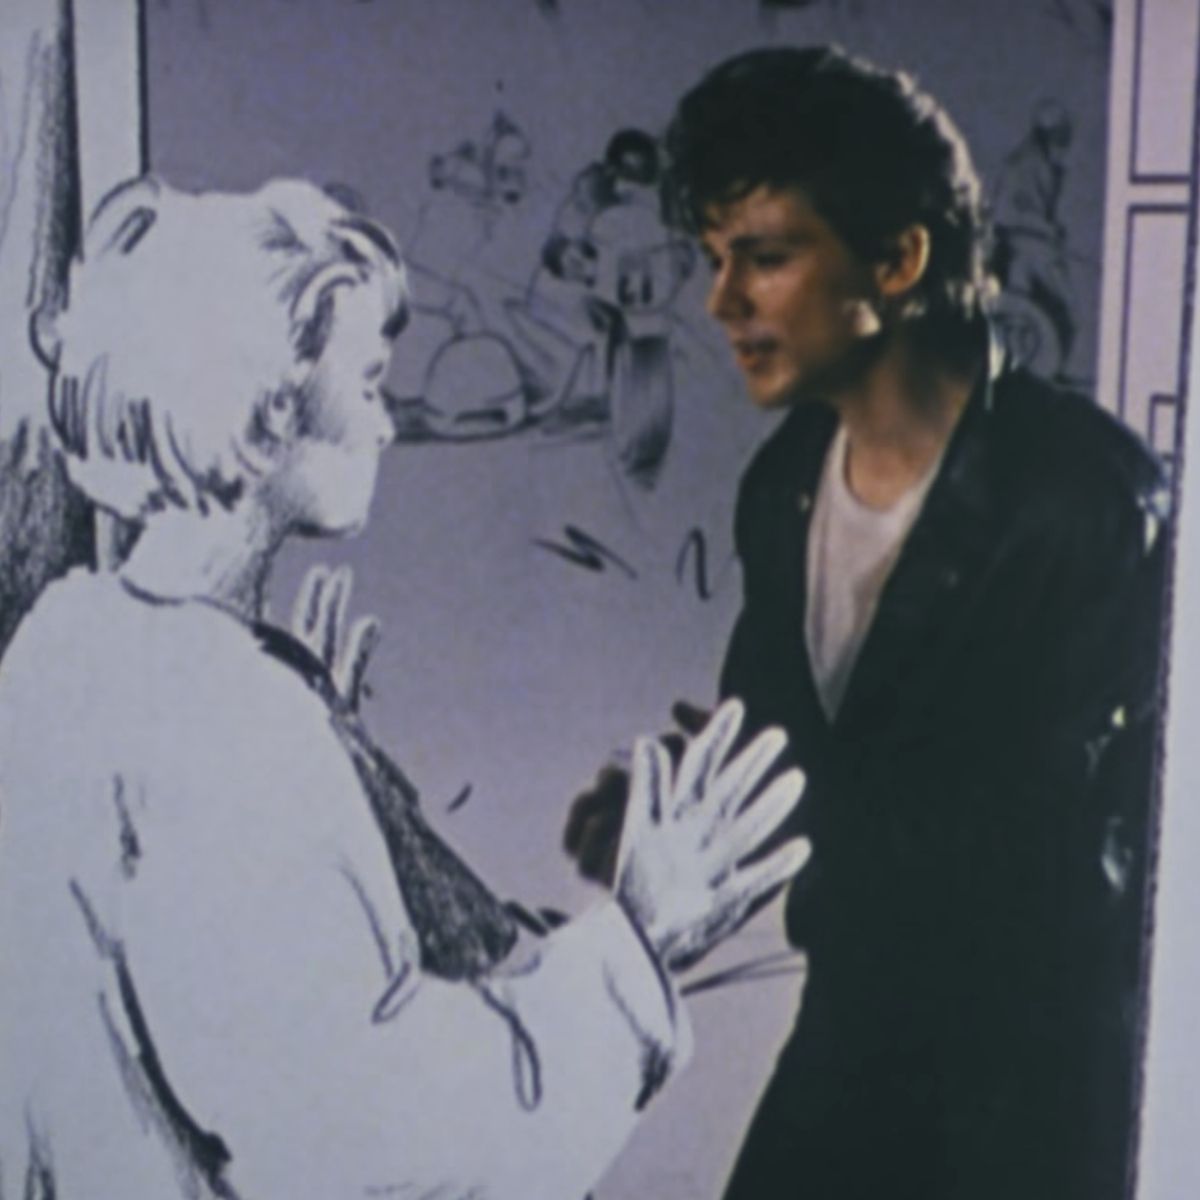 A frame from the video "Take On Me" by the group "A-ha"